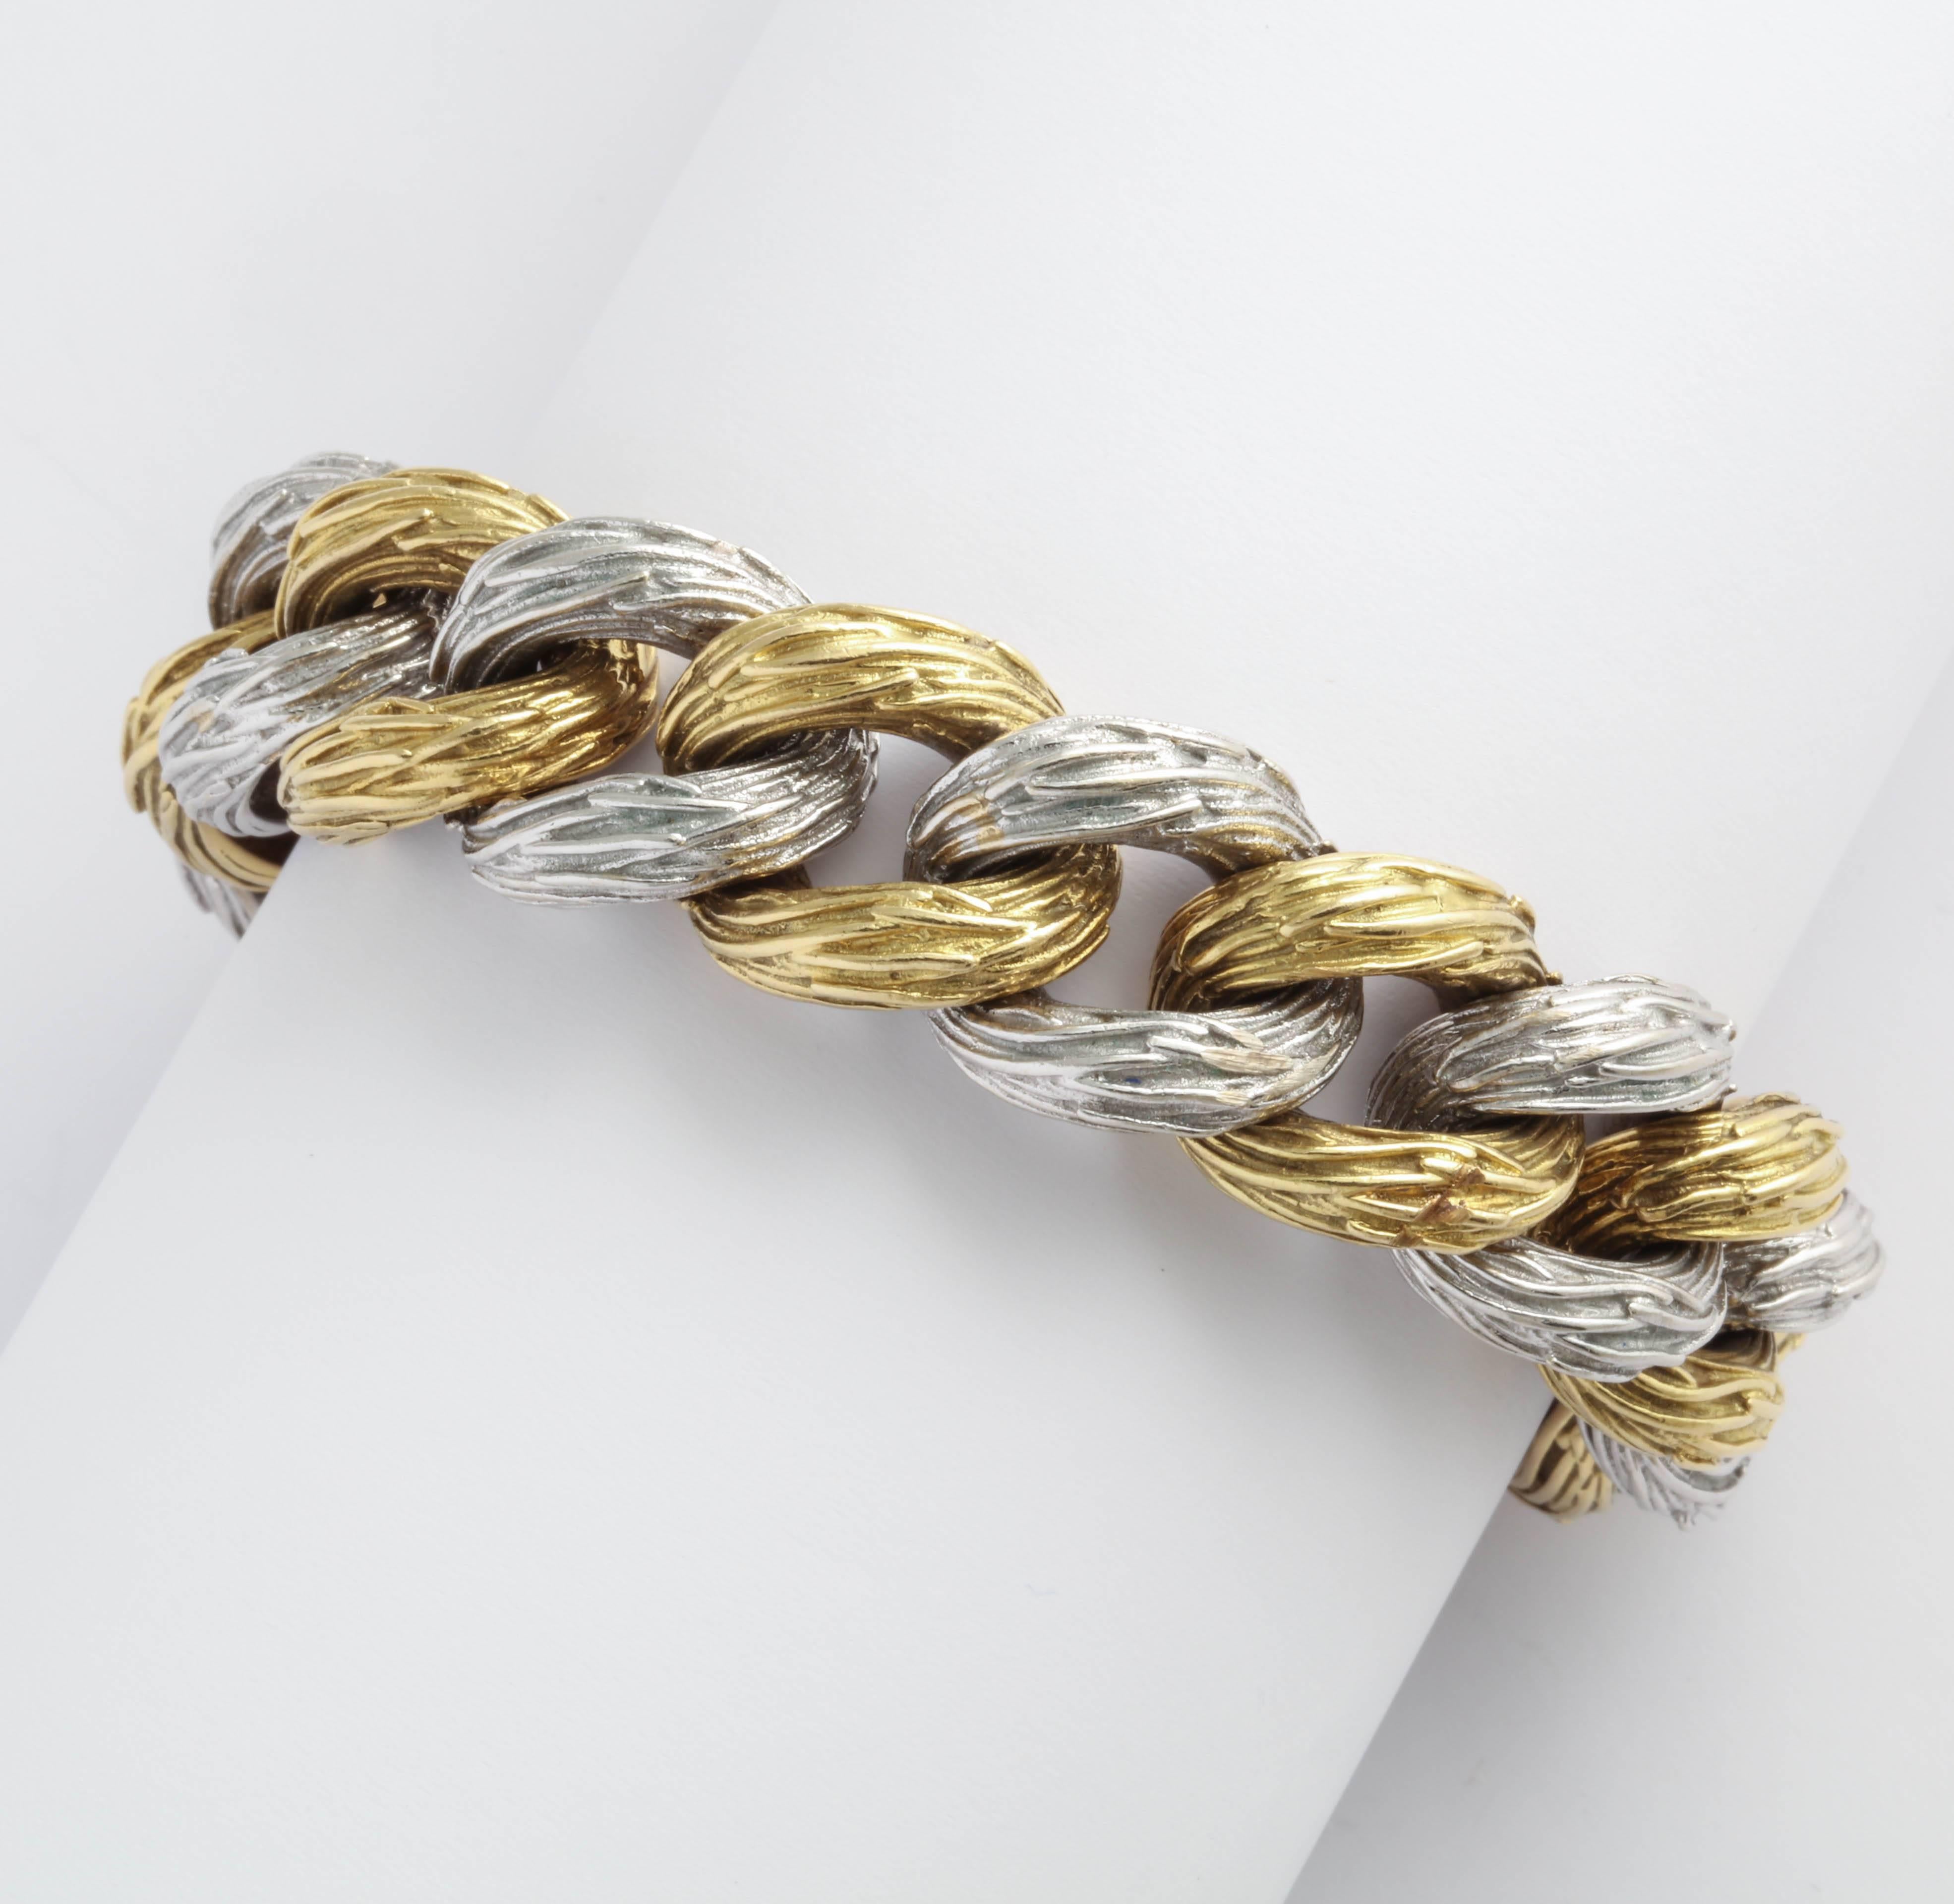 Spectacular 18kt  White and alternating Yellow Gold Bracelet with a sculptural Oval Link and self closing clasp.  SO HOT and CHIC. Very wearable and long enough to be worn by either sex.  Makers Mark - un-identifiable and Italian Control Mark.   SO